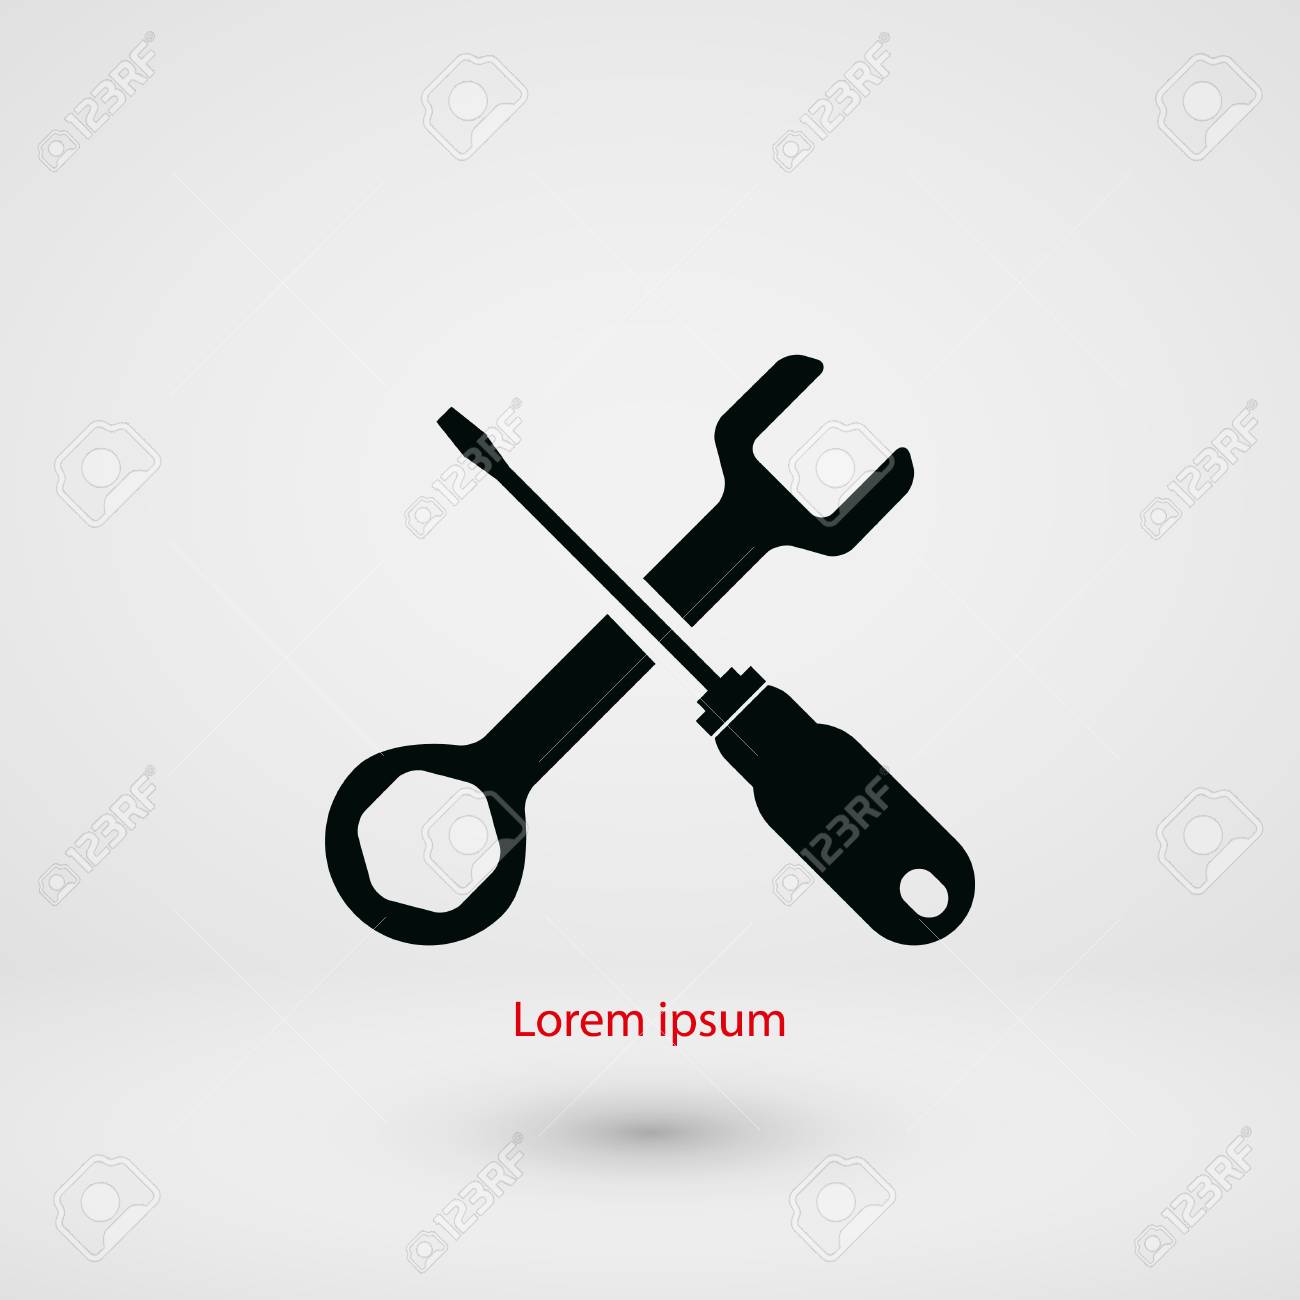 Hammer And Wrench Icon  Stock Vector  ahasoft #85962298